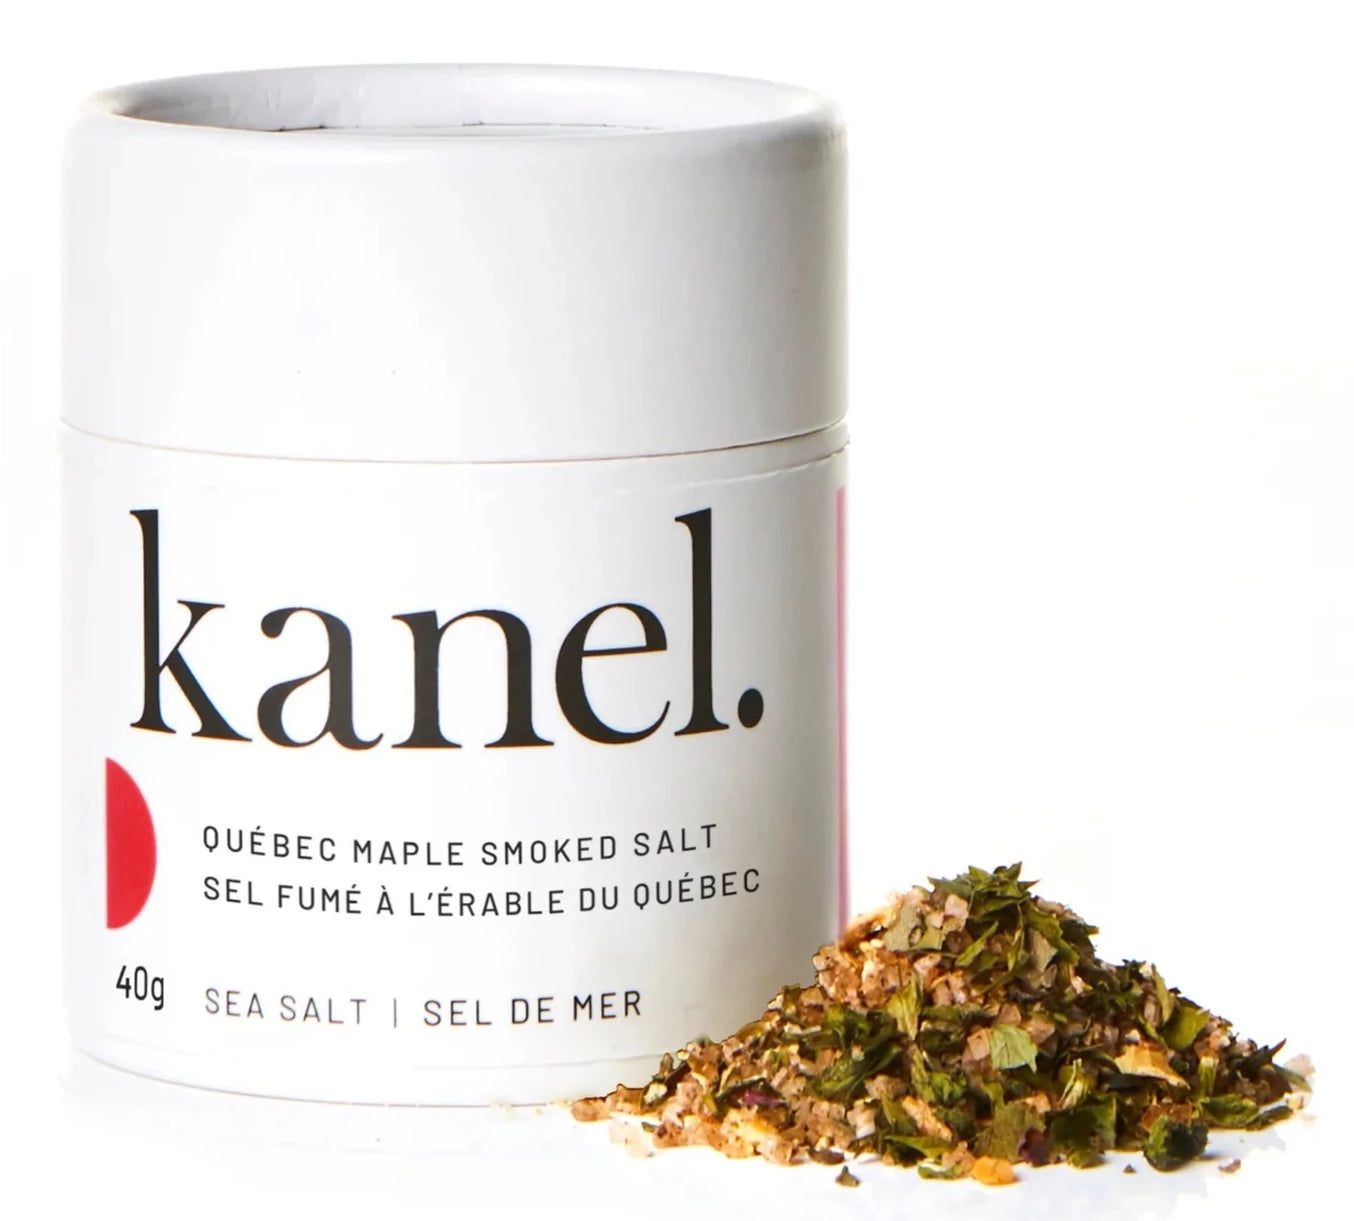 Quebec Maple Smoked Salt by Kanel, 40g